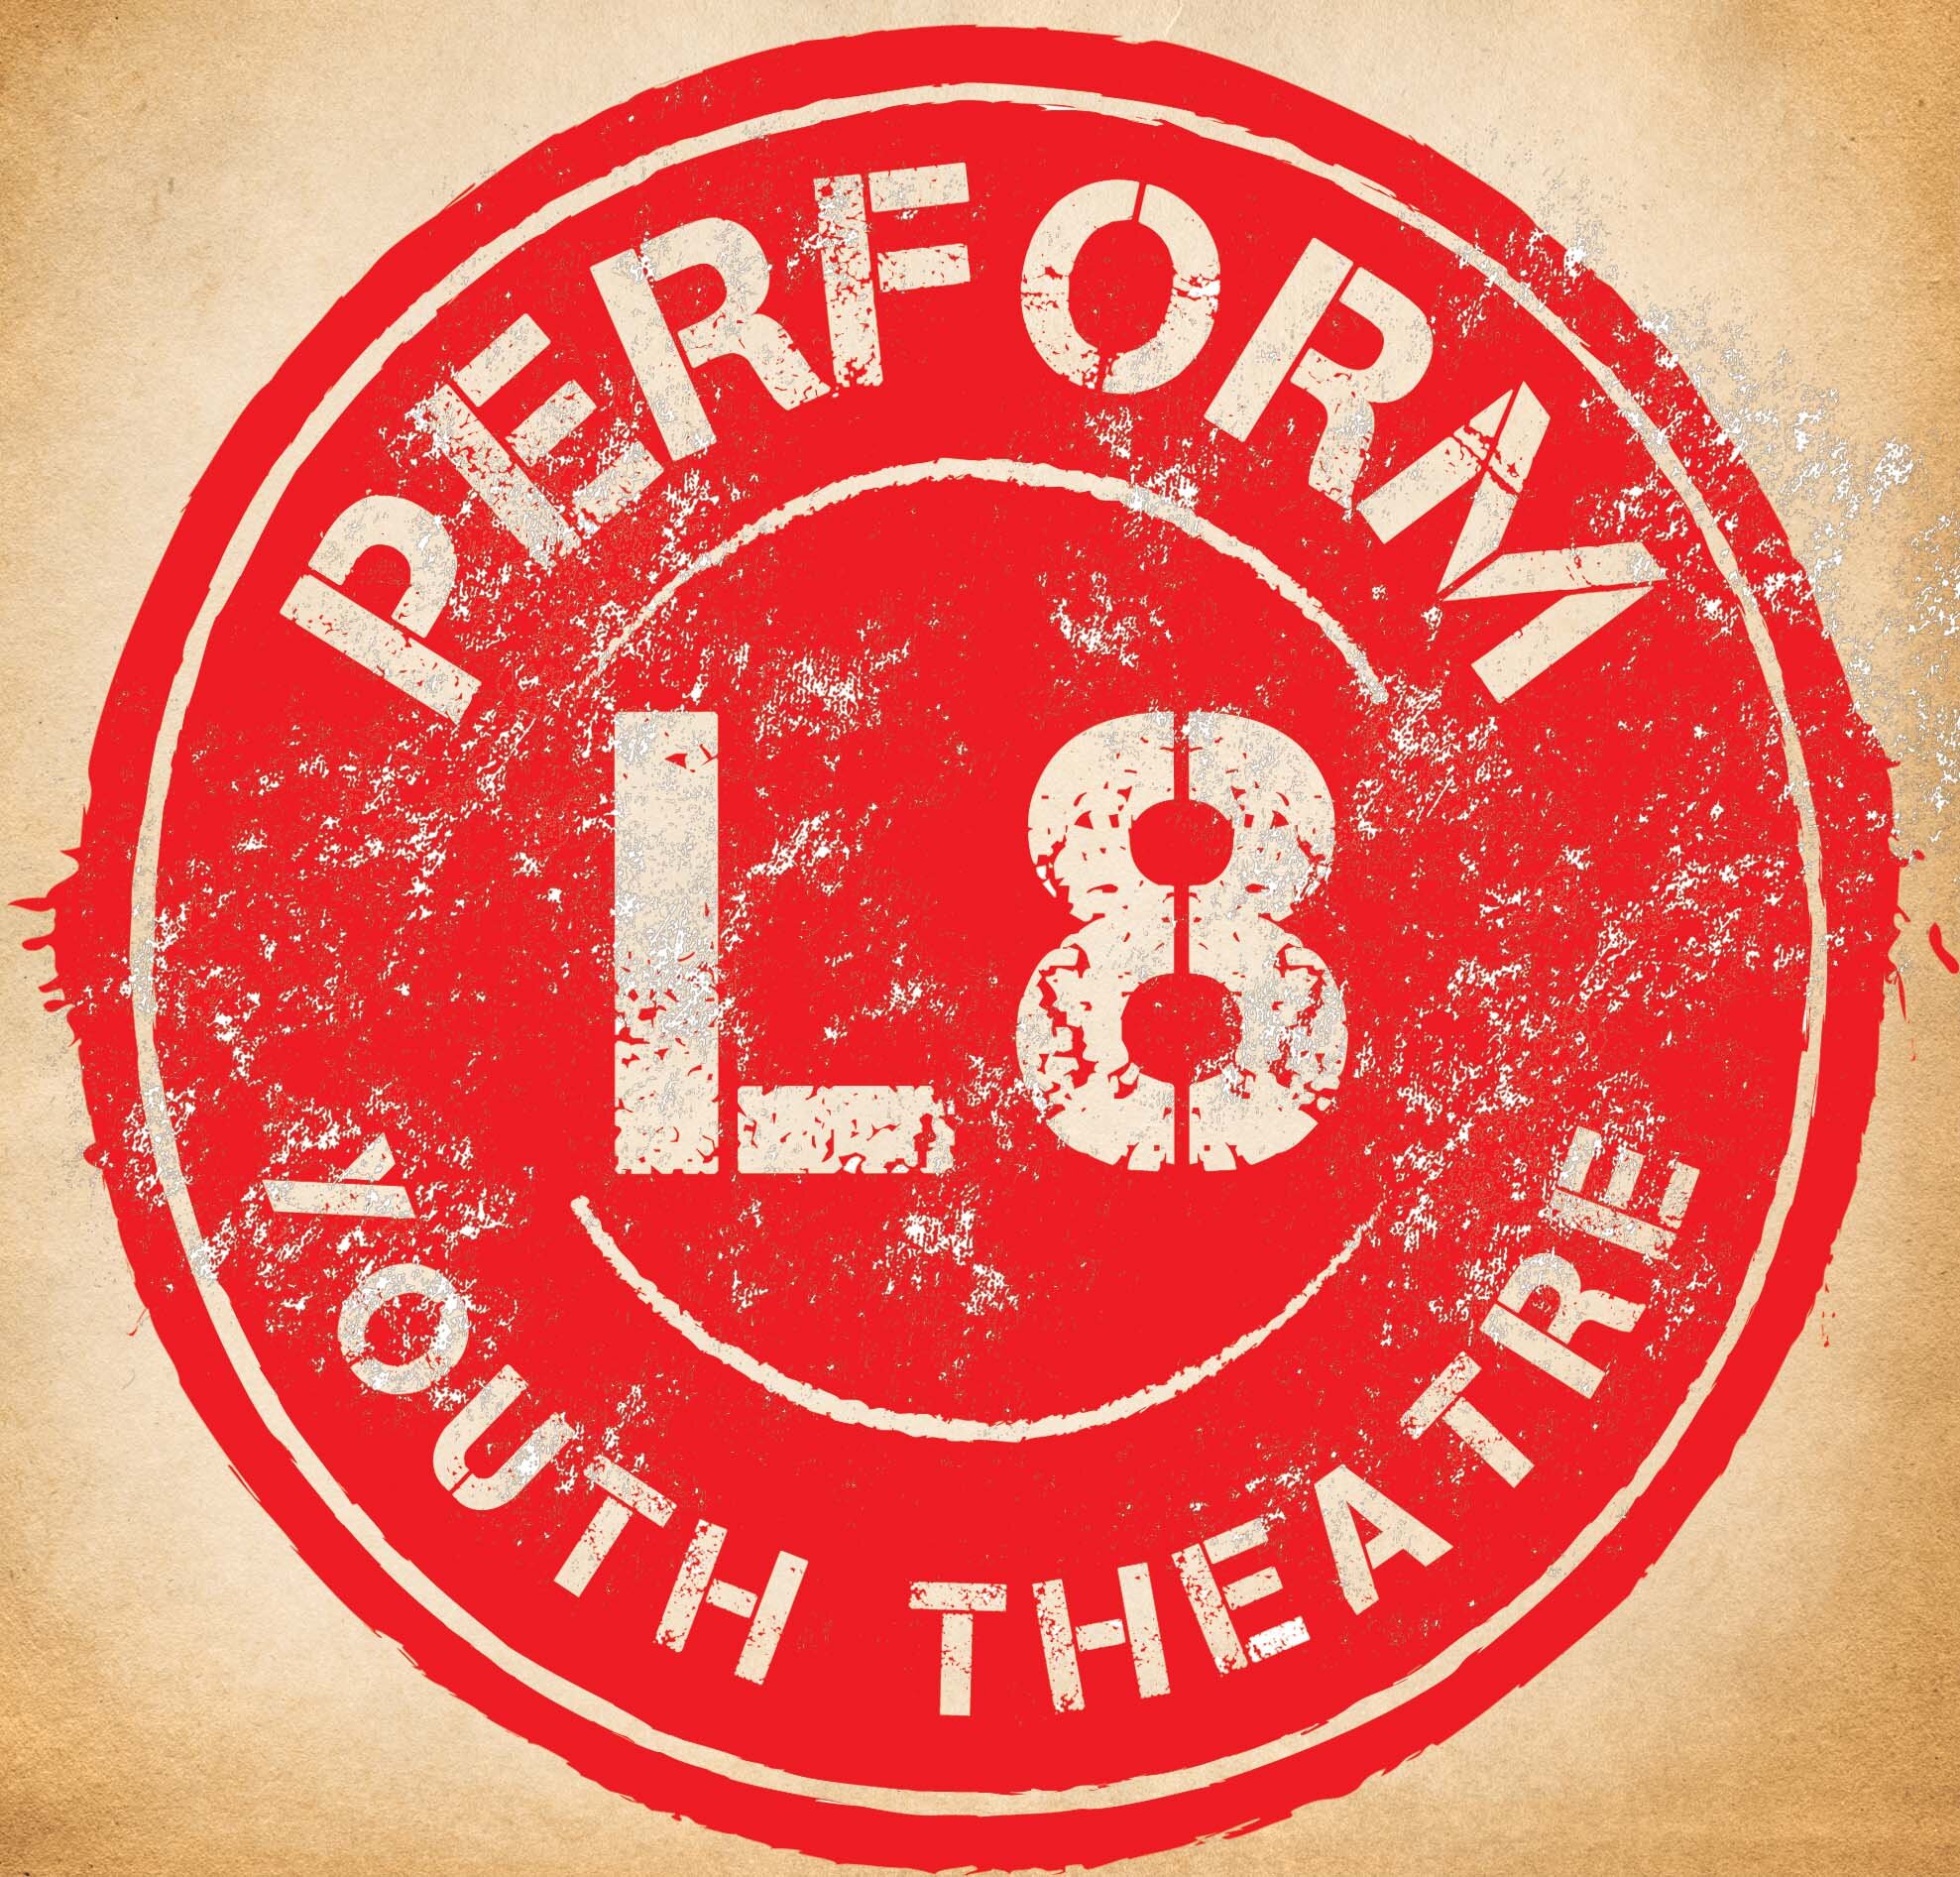 Perform L8 Youth Theatre (Ages: 11-16) Tuesdays 4.30-6.30pm at The Florrie, Mill St.